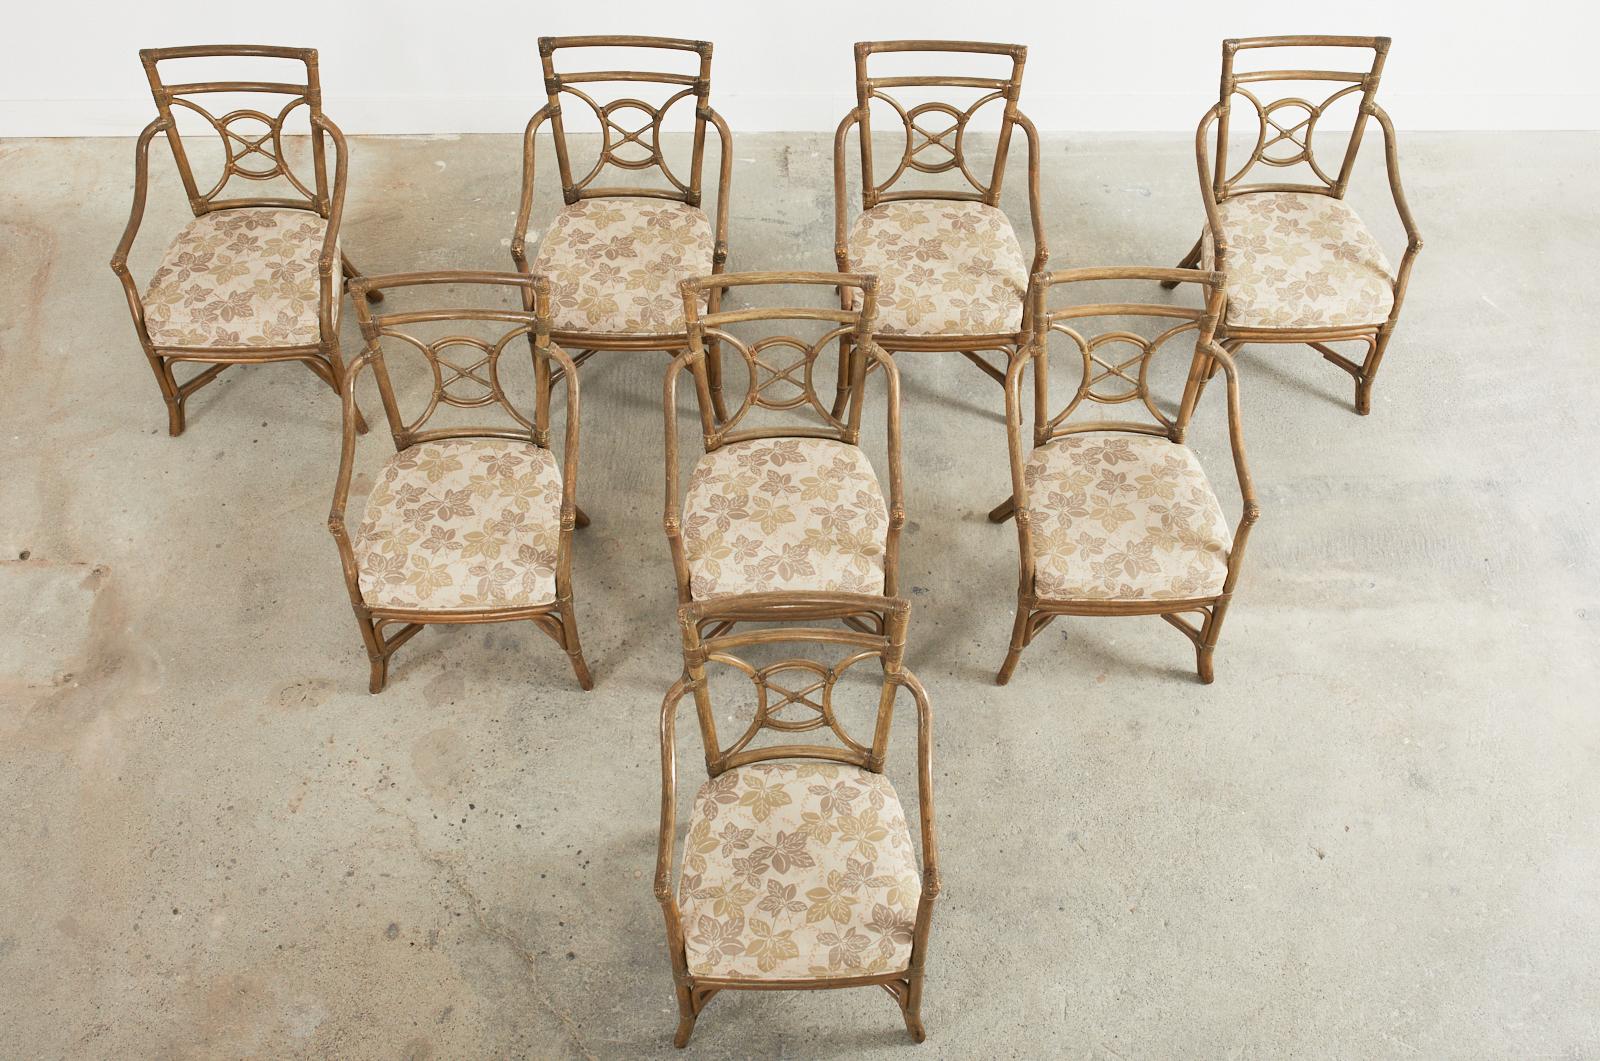 Organic modern set of eight rattan dining armchairs made in the style and manner of McGuire. Artisan crafted chairs constructed in San Francisco, CA featuring a target or bullseye motif back splat. Made from thick rattan poles lashed together with